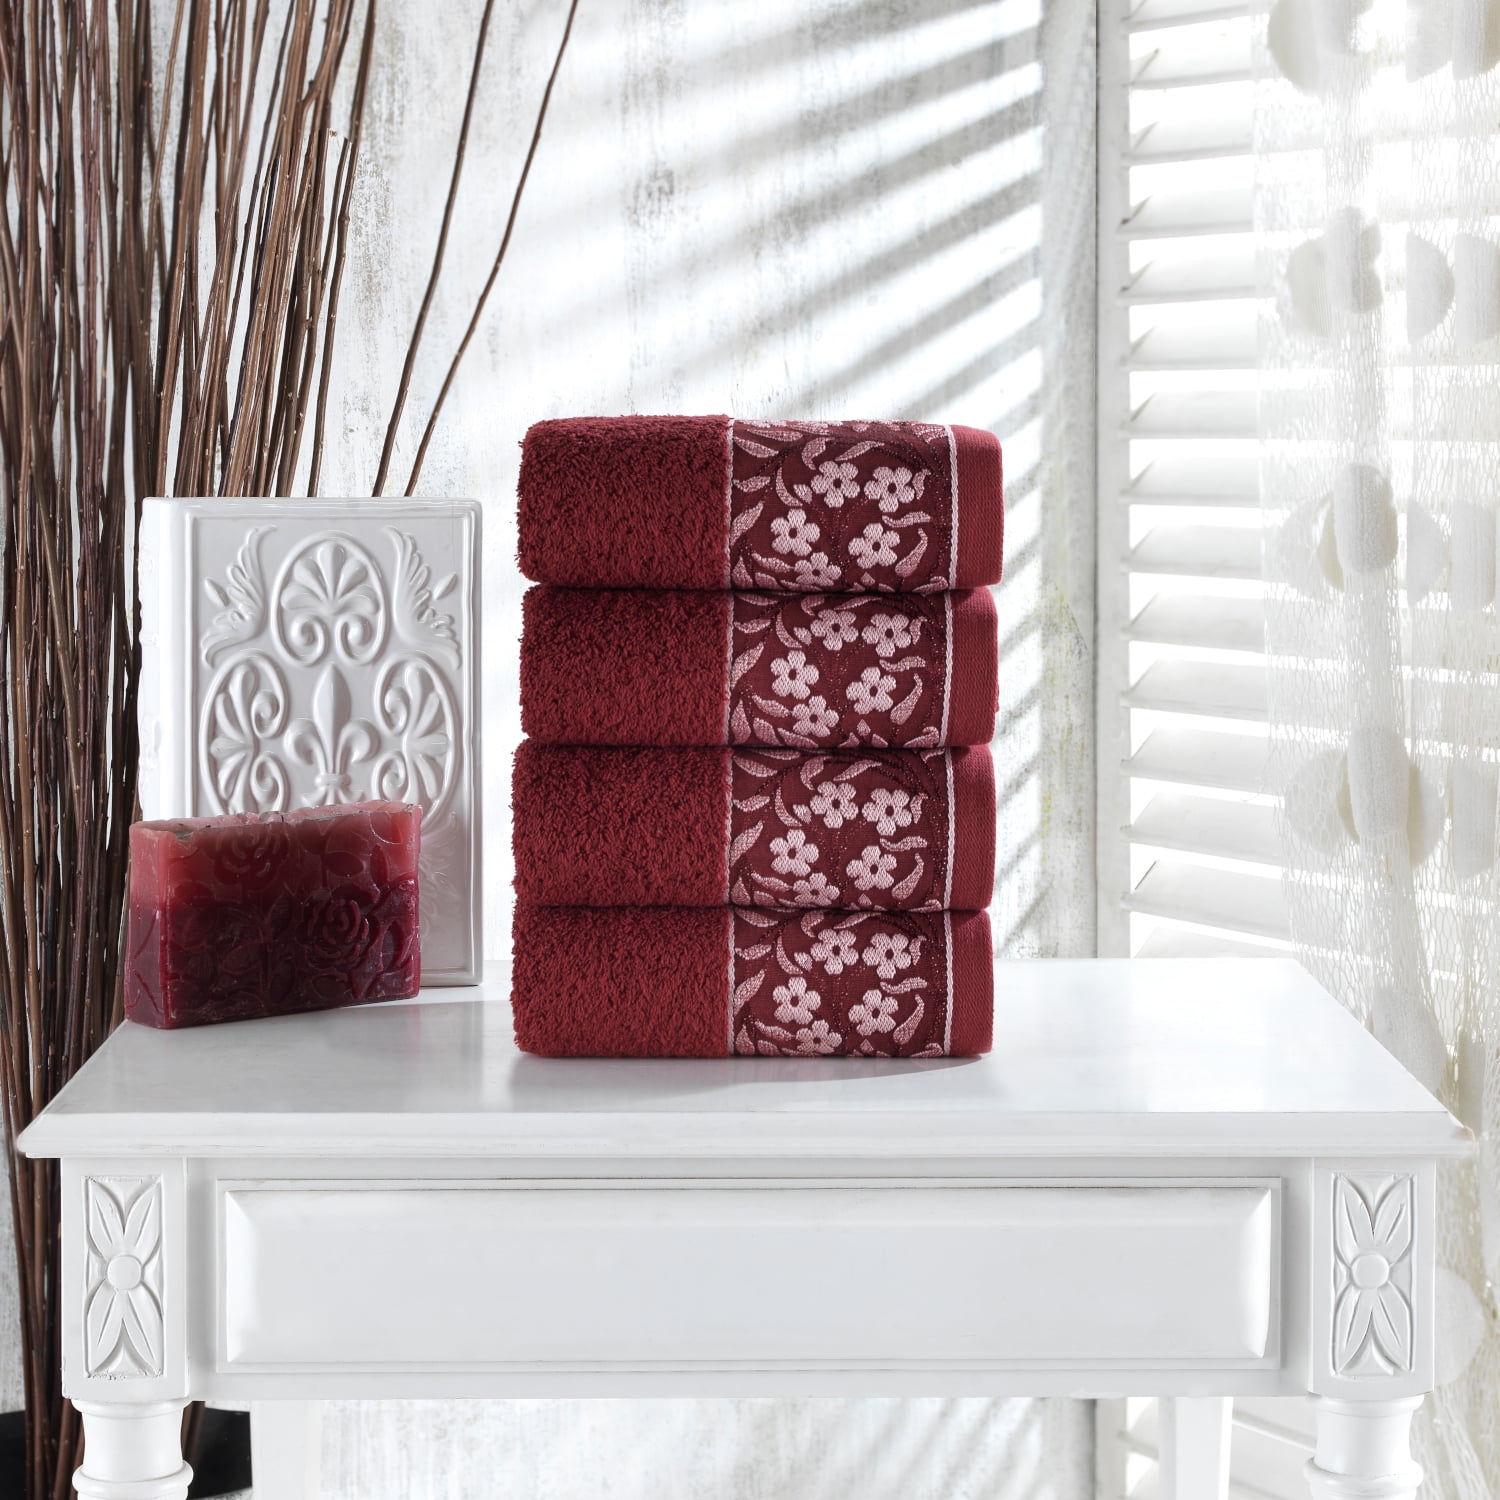 HALLEY Decorative Bath Towels Set, 6 Piece - Turkish Towel Set with Floral  Pattern, Highly Absorbent & Fade Resistant Fabric, 100% Cotton - White